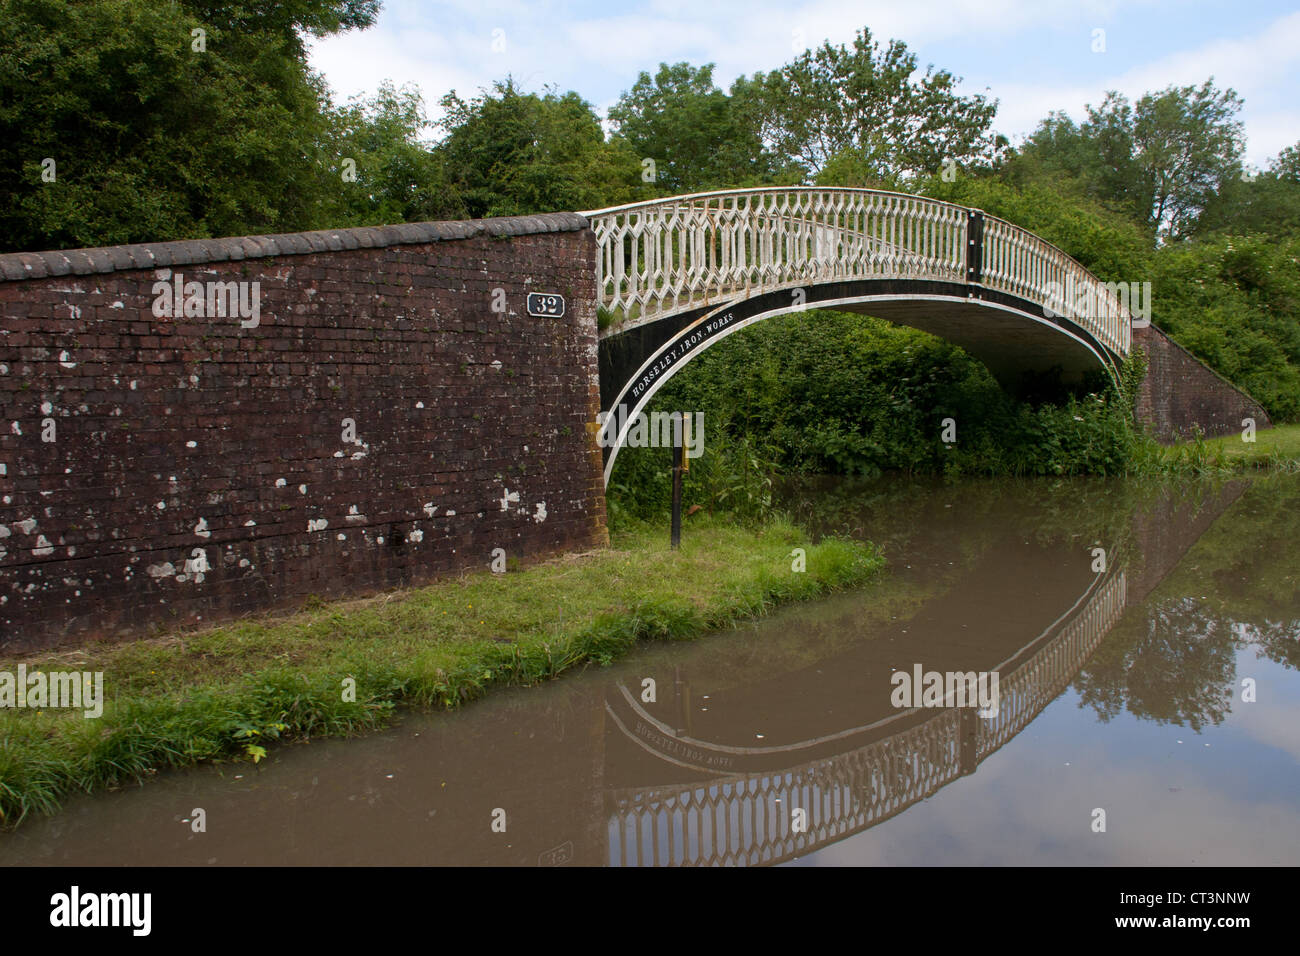 This wrought iron bridge number 32 over the old Brinklow course of the Oxford canal canal - was made by Horsley Iron works. Stock Photo